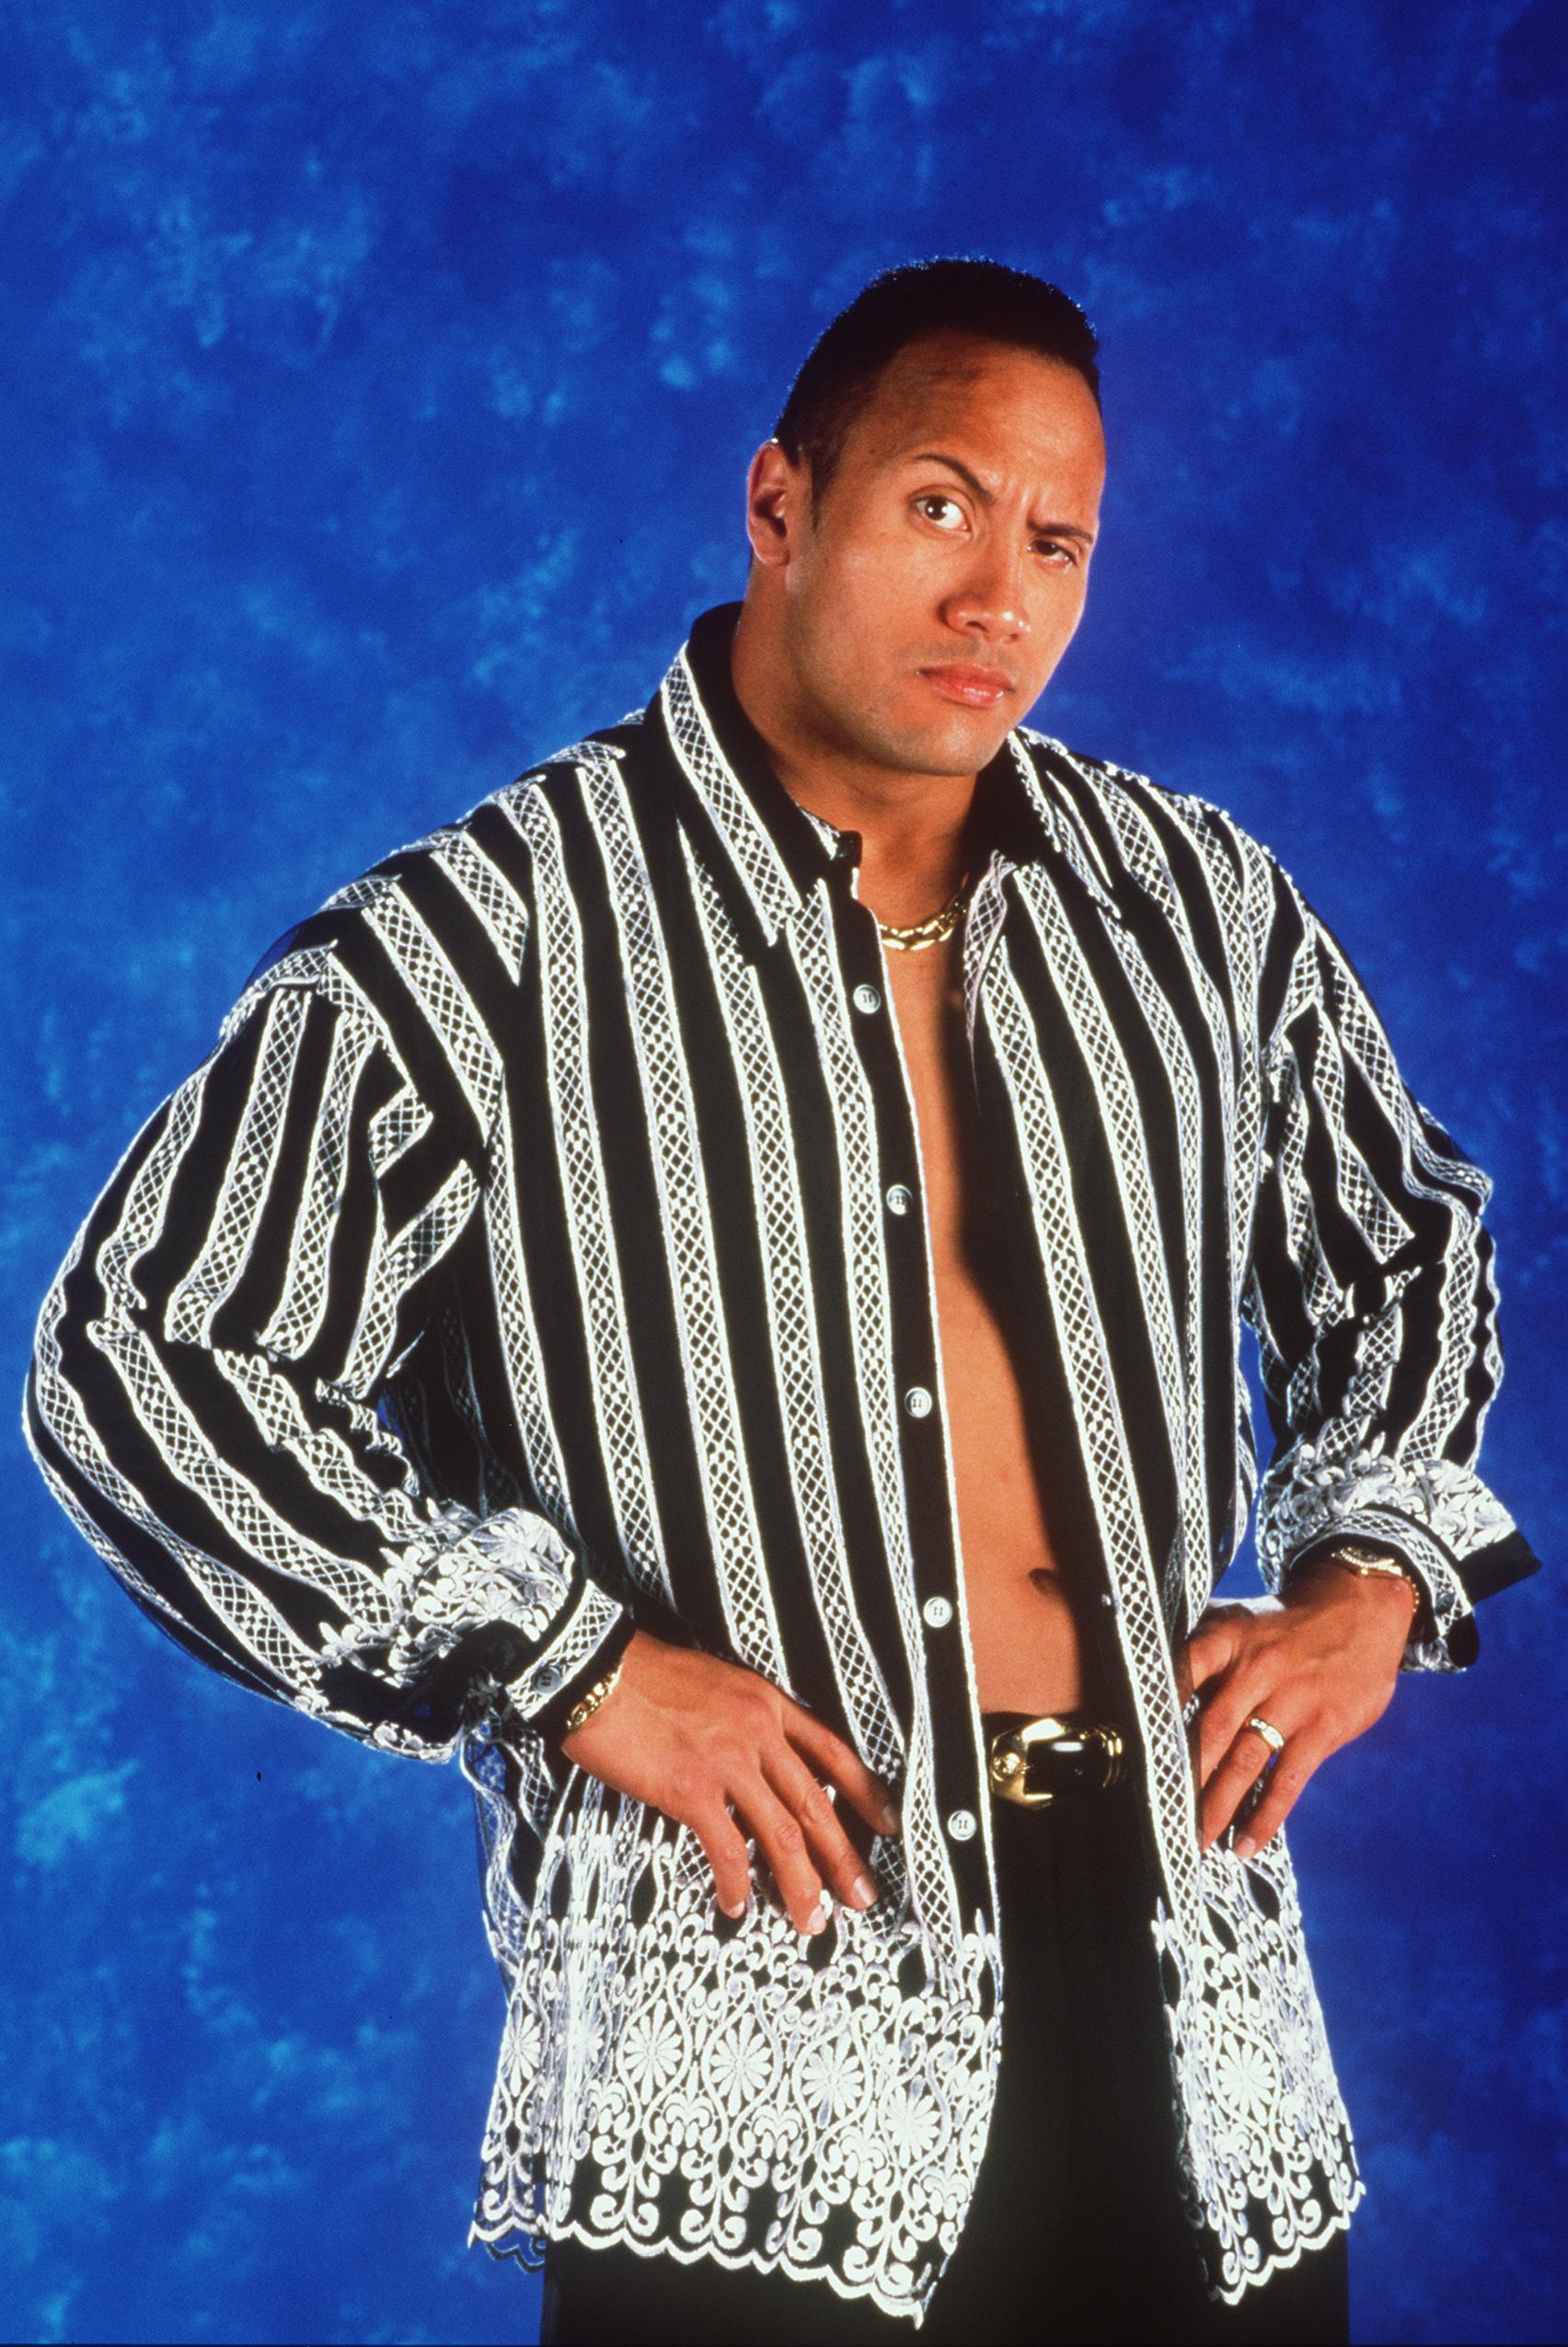 Dwayne Johnson at the World Wrestling Federation's Wrestler Rock Poses on June 12, 2000, in Los Angeles, California. | Source: Getty Images